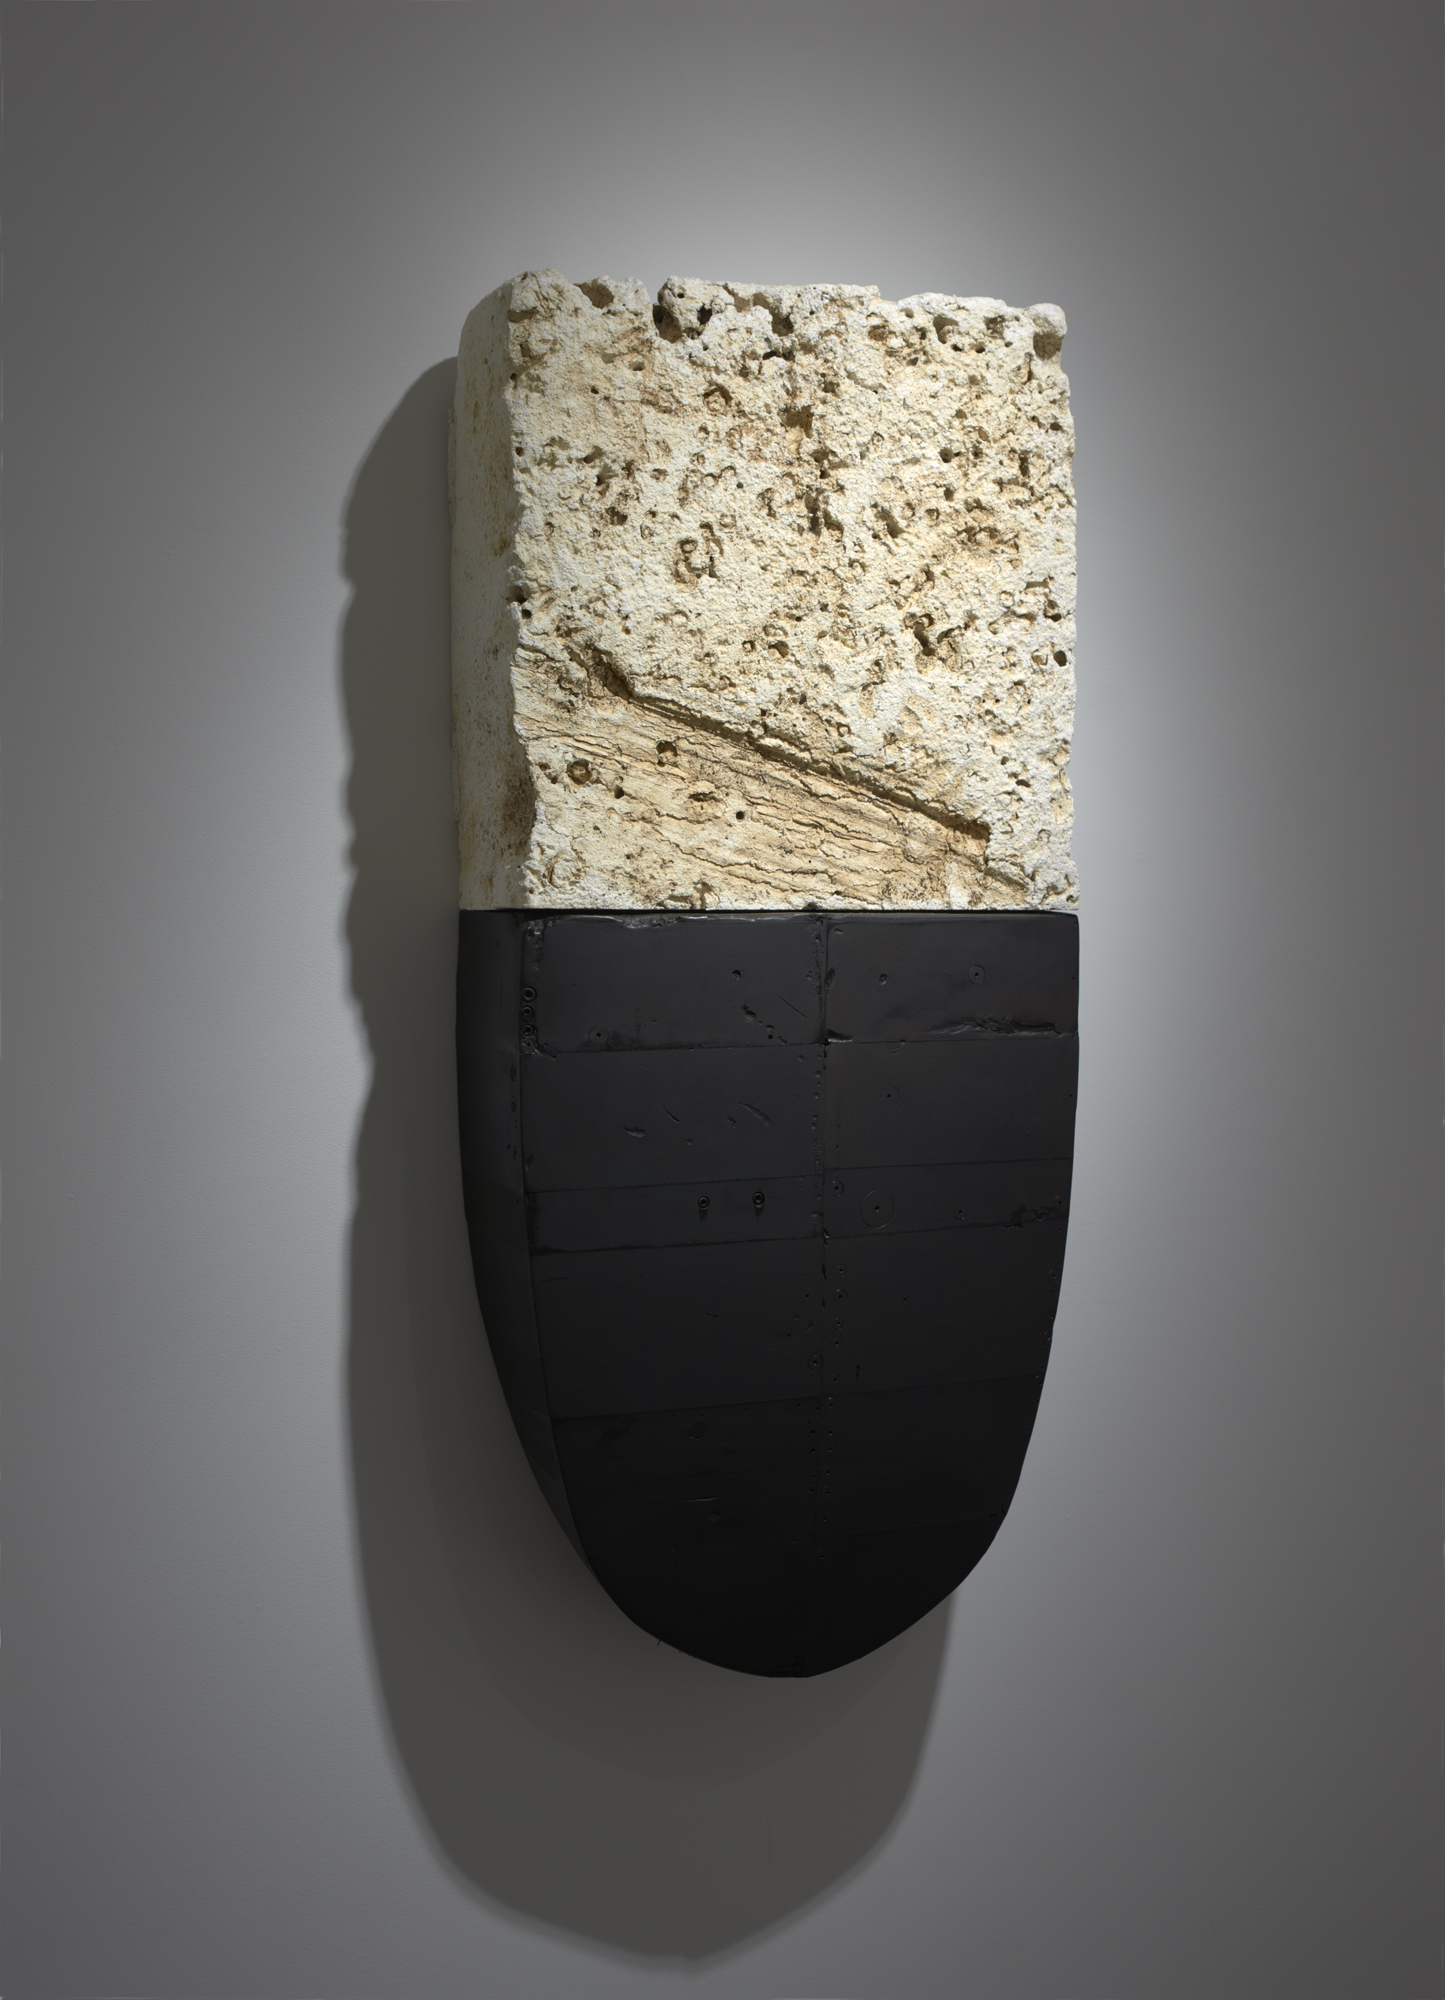 #60, 2006-2008, painted plaster, 38 x 30 x 16 in